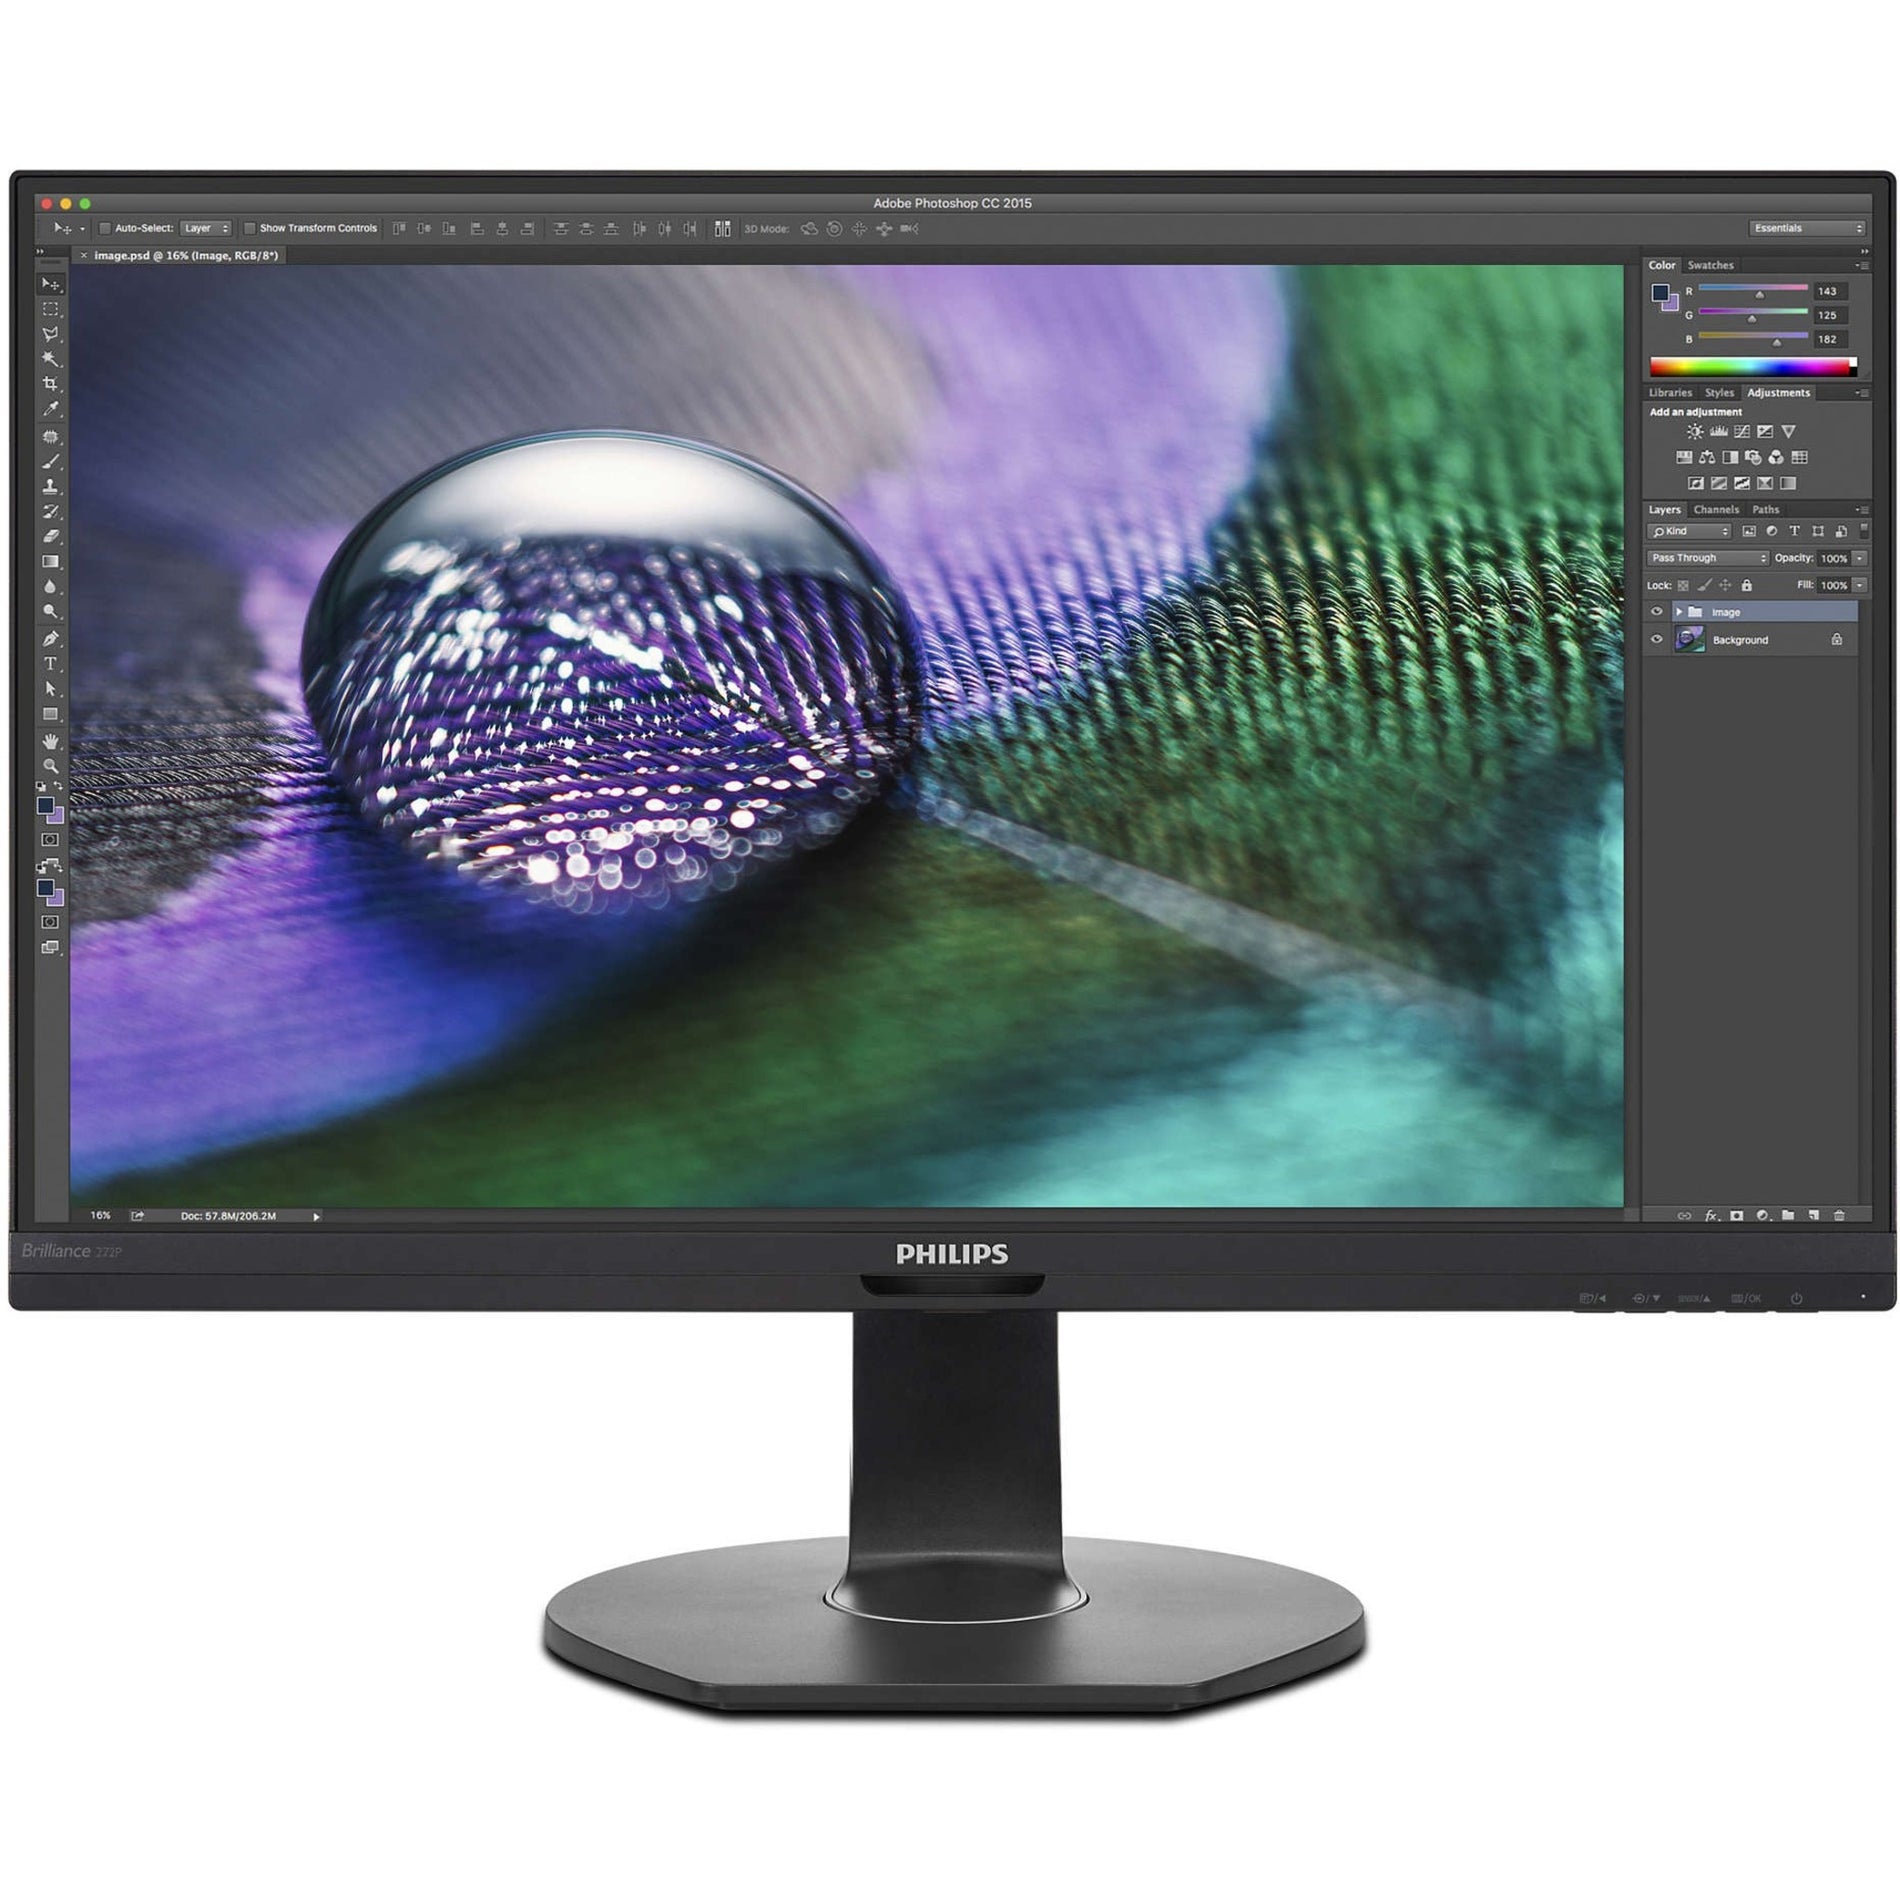 Philips 27" 4K UHD LCD Monitor with USB-C Dock [Discontinued]